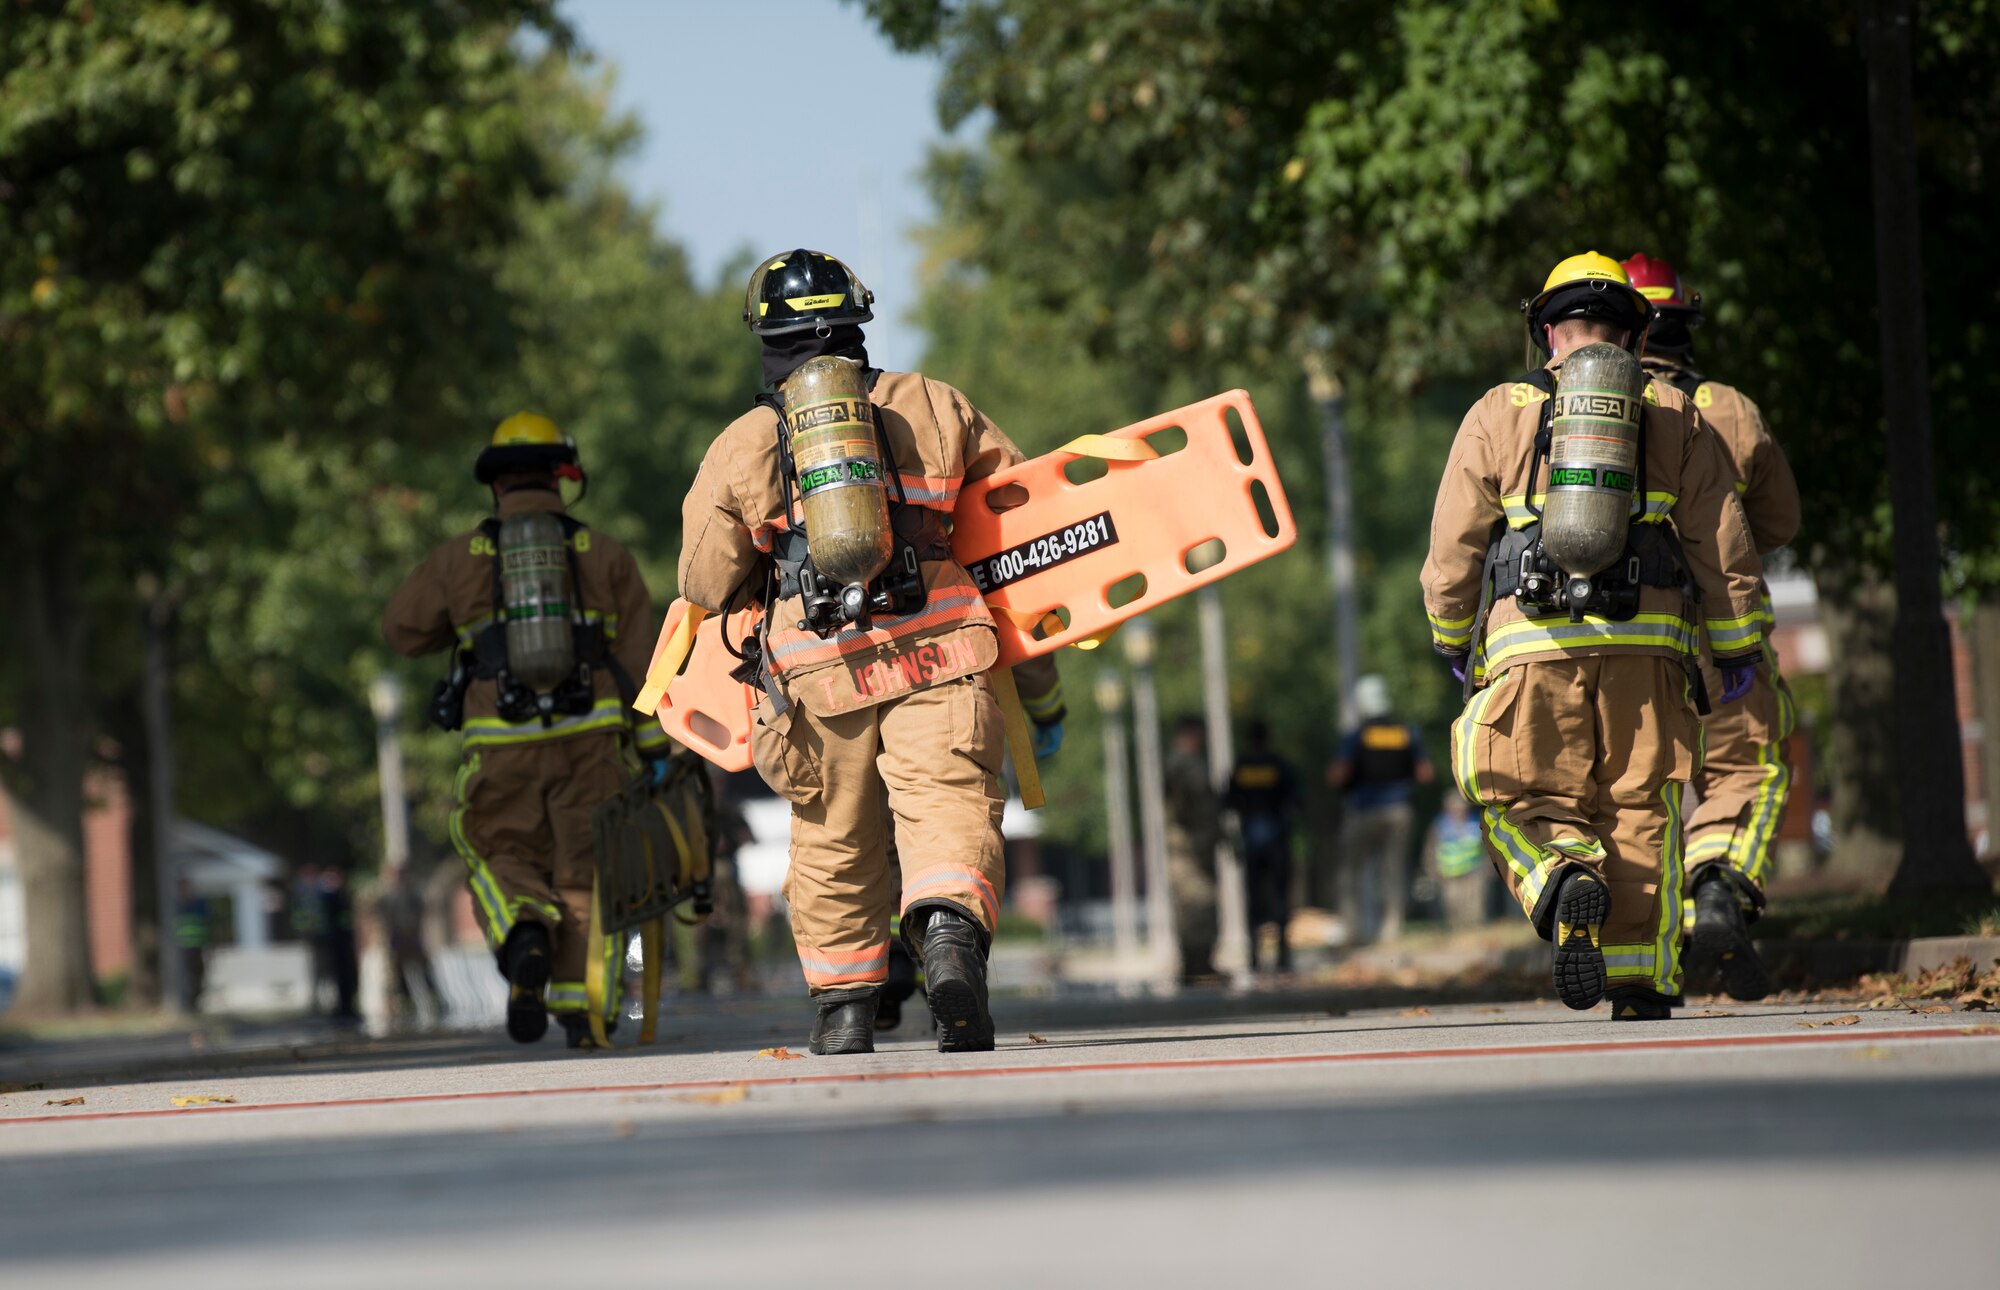 U.S. Air Force firefighter respond during exercise